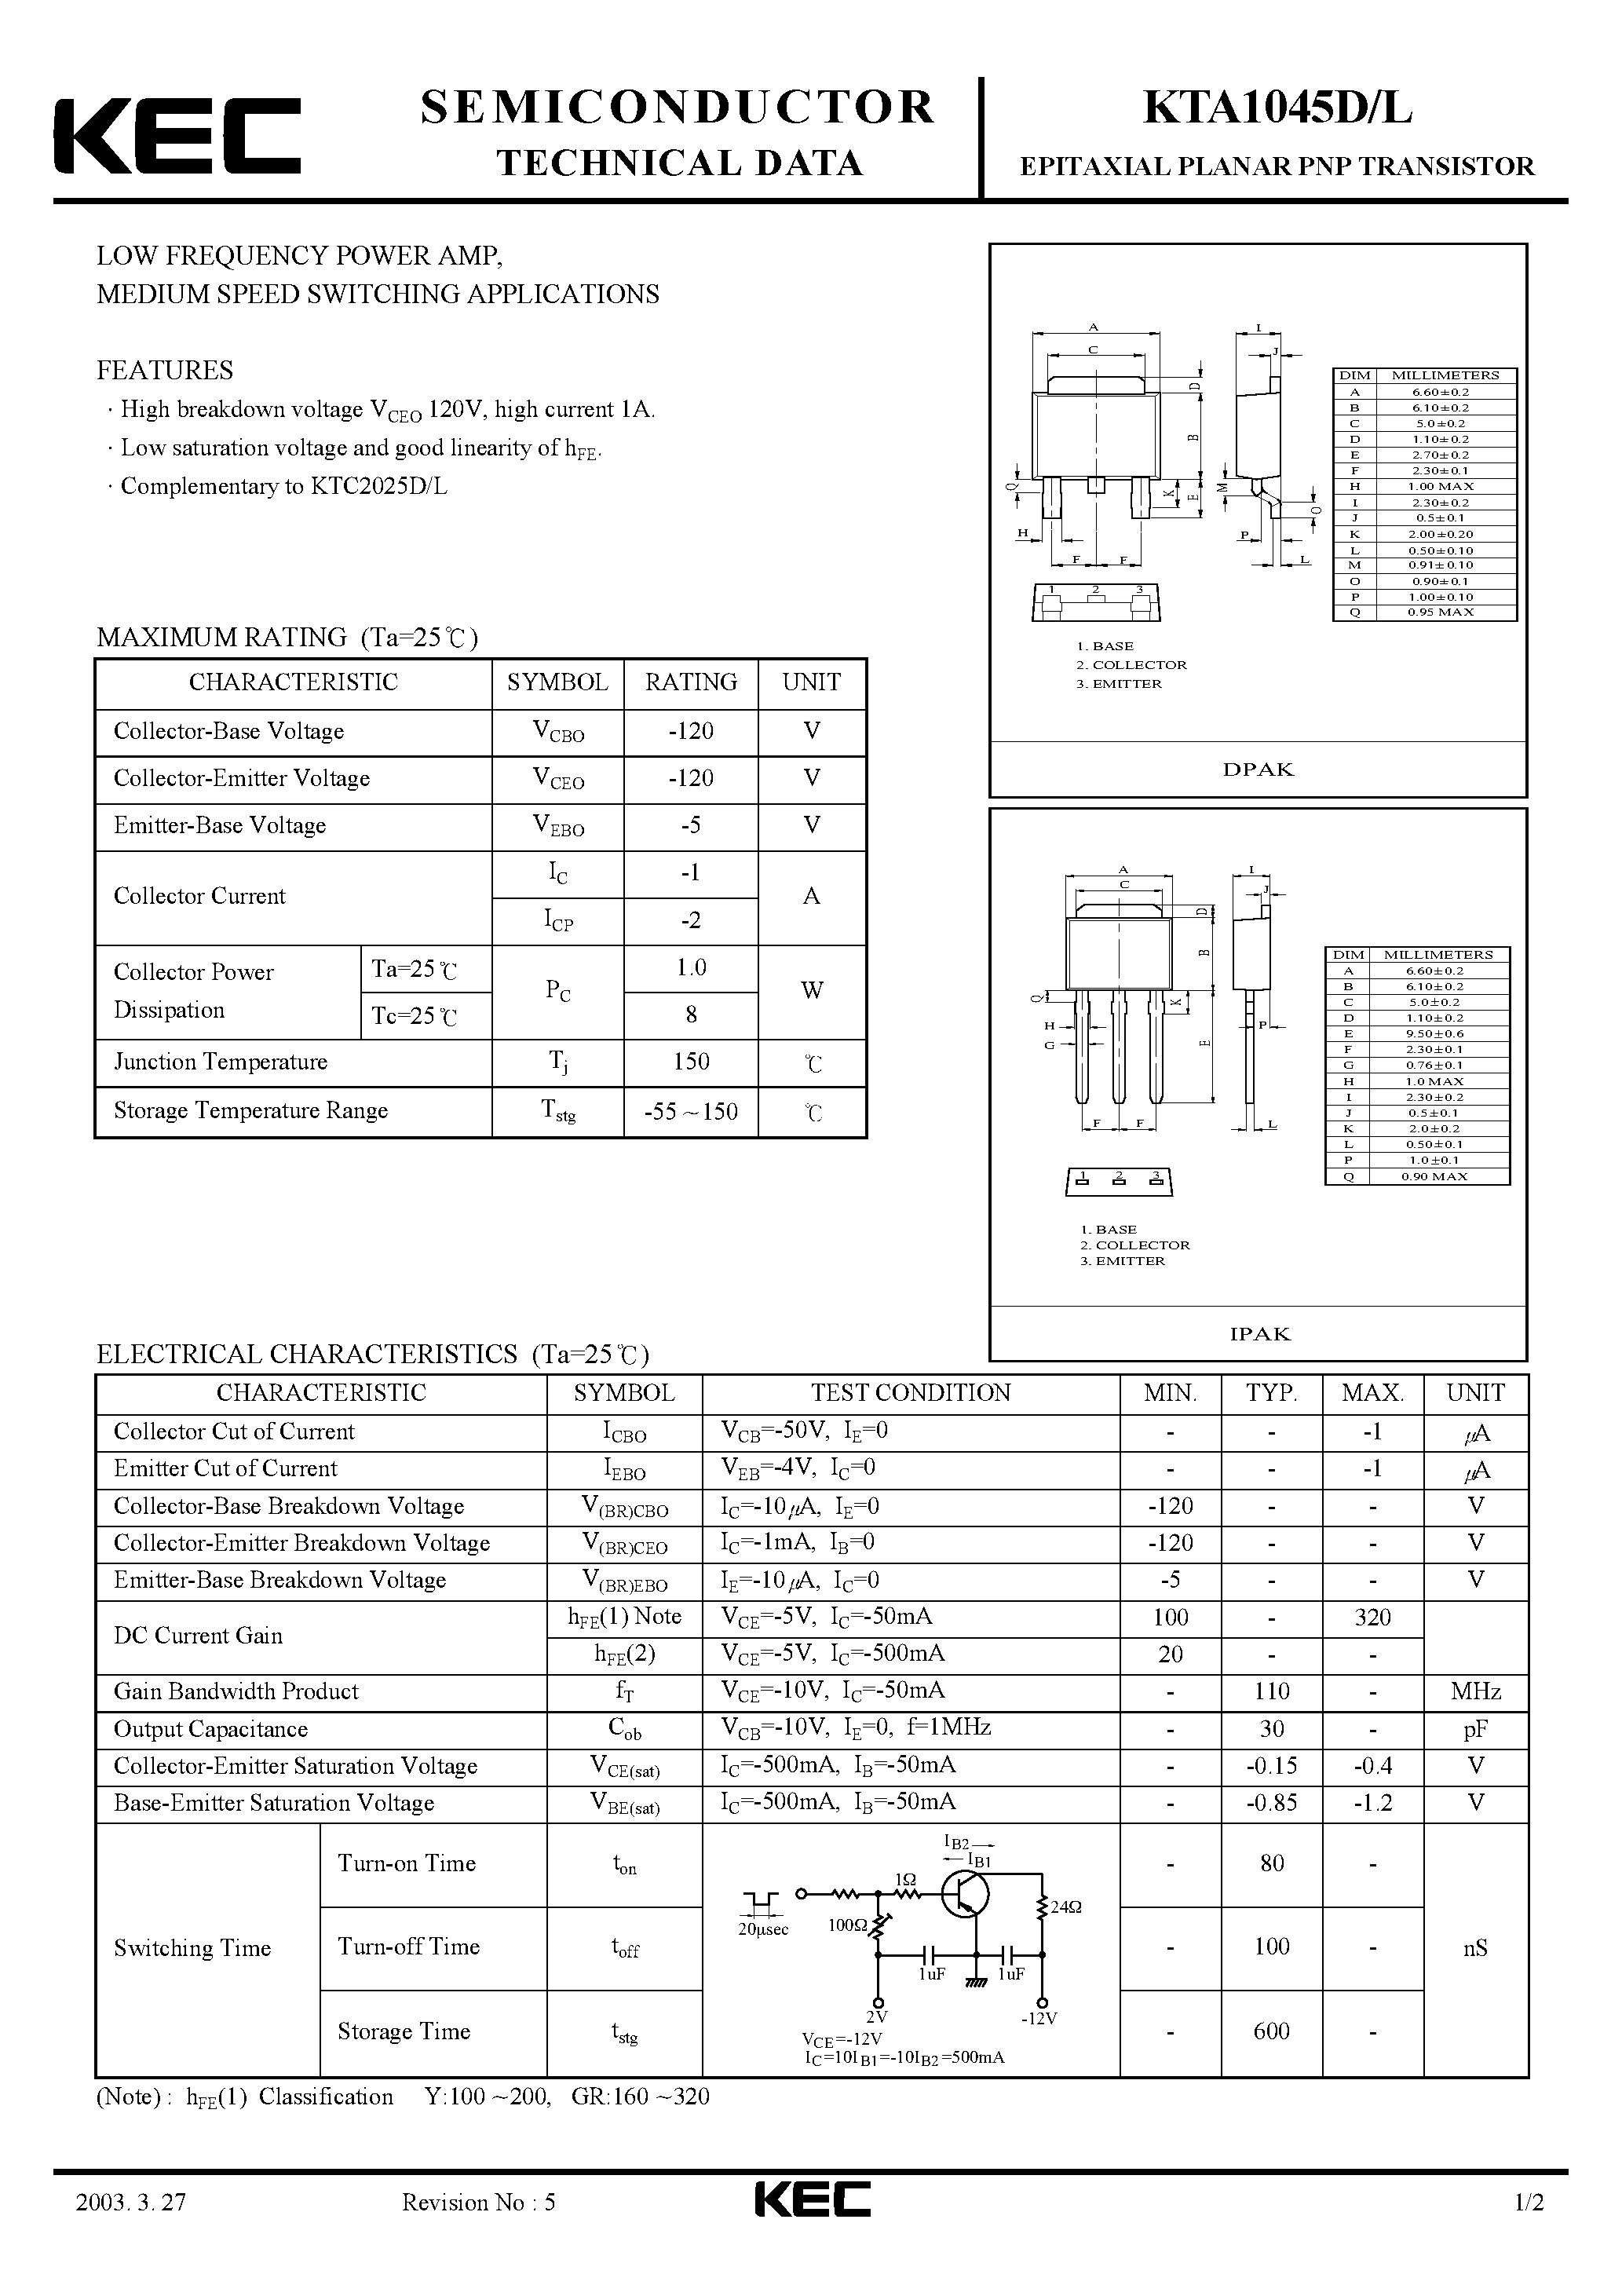 Datasheet KTA1045L - EPITAXIAL PLANAR PNP TRANSISTOR (LOW FREQUENCY POWER AMP/ MEDIUM SPEED SWITCHING) page 1